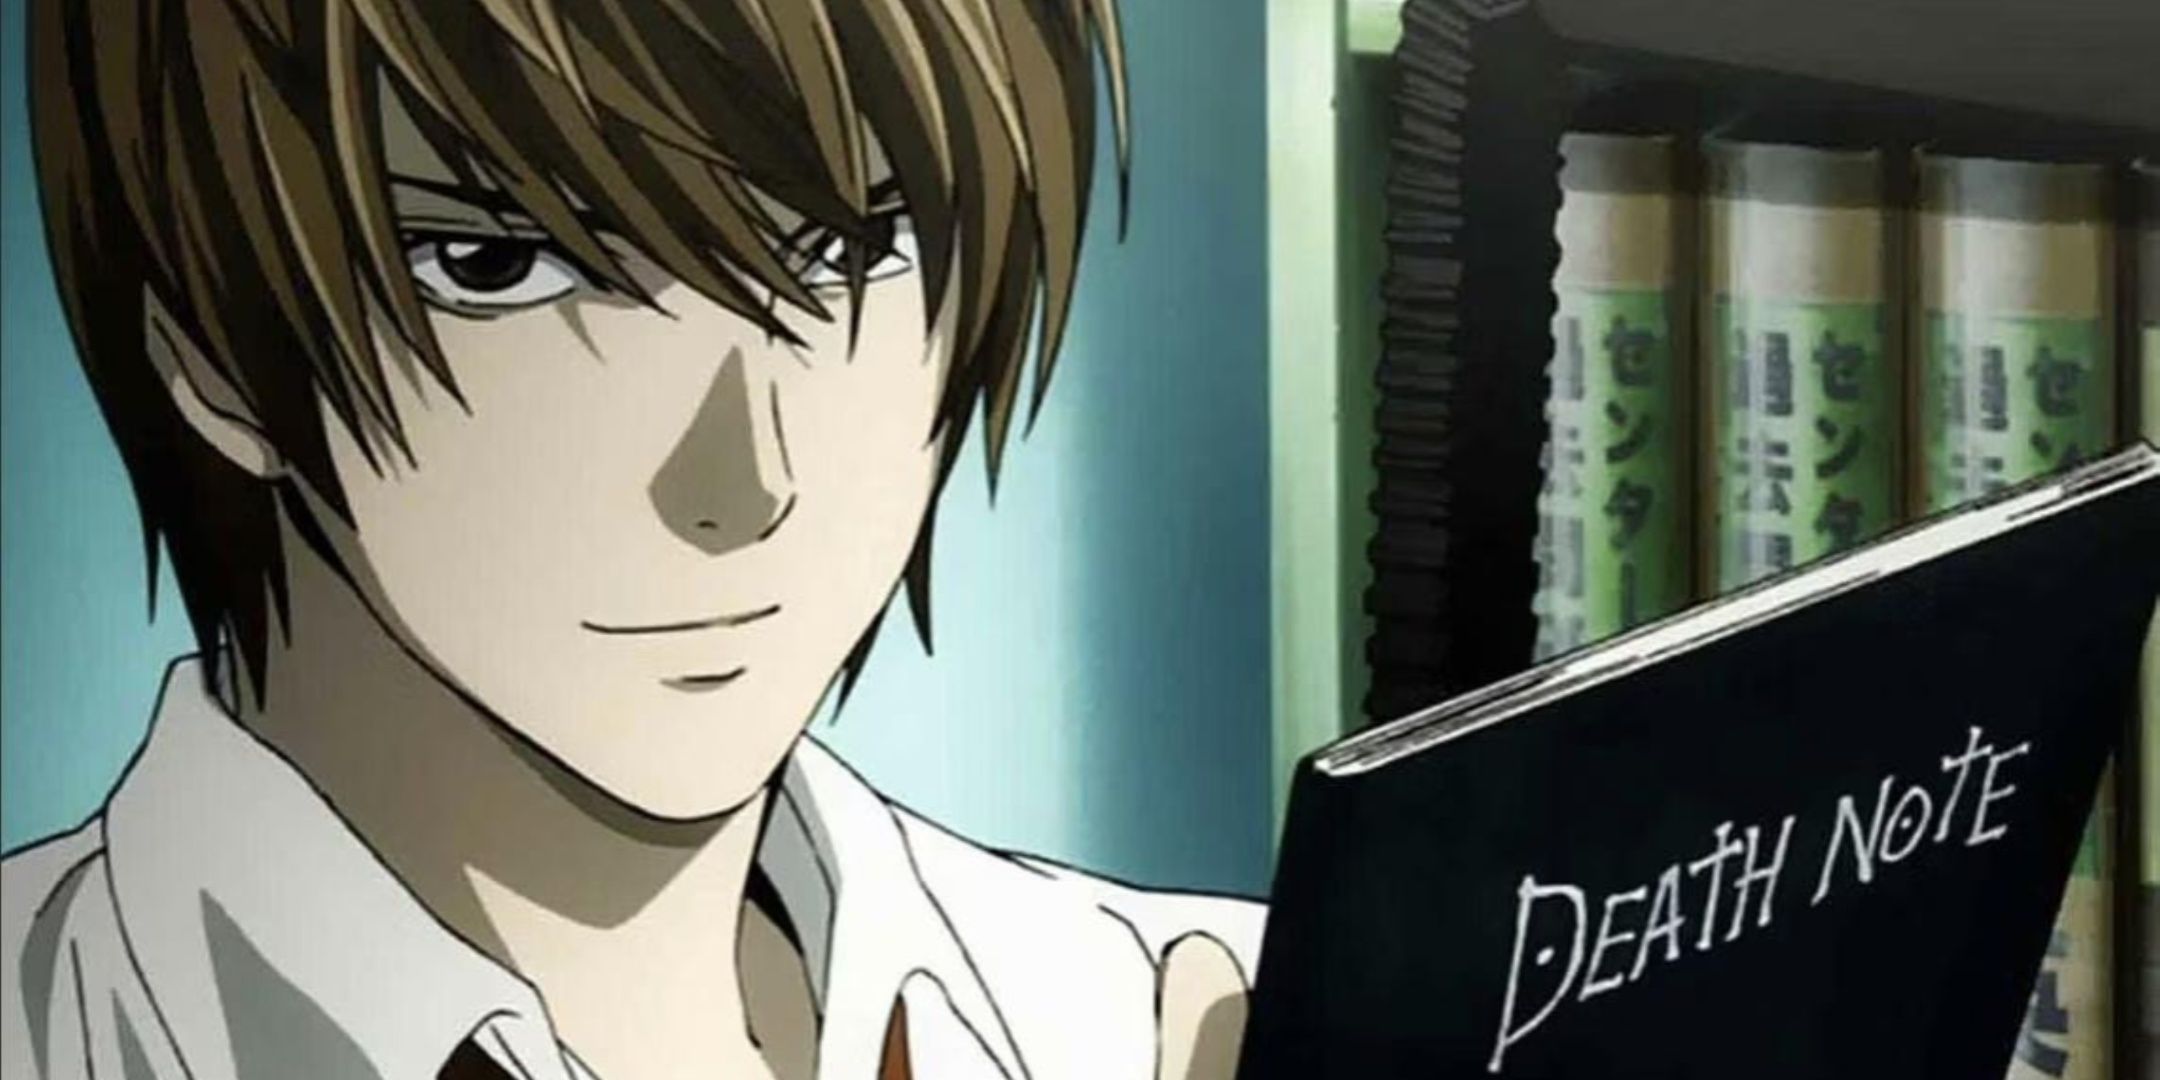 Death Note Could Be Getting Game, EU Trademark Suggests